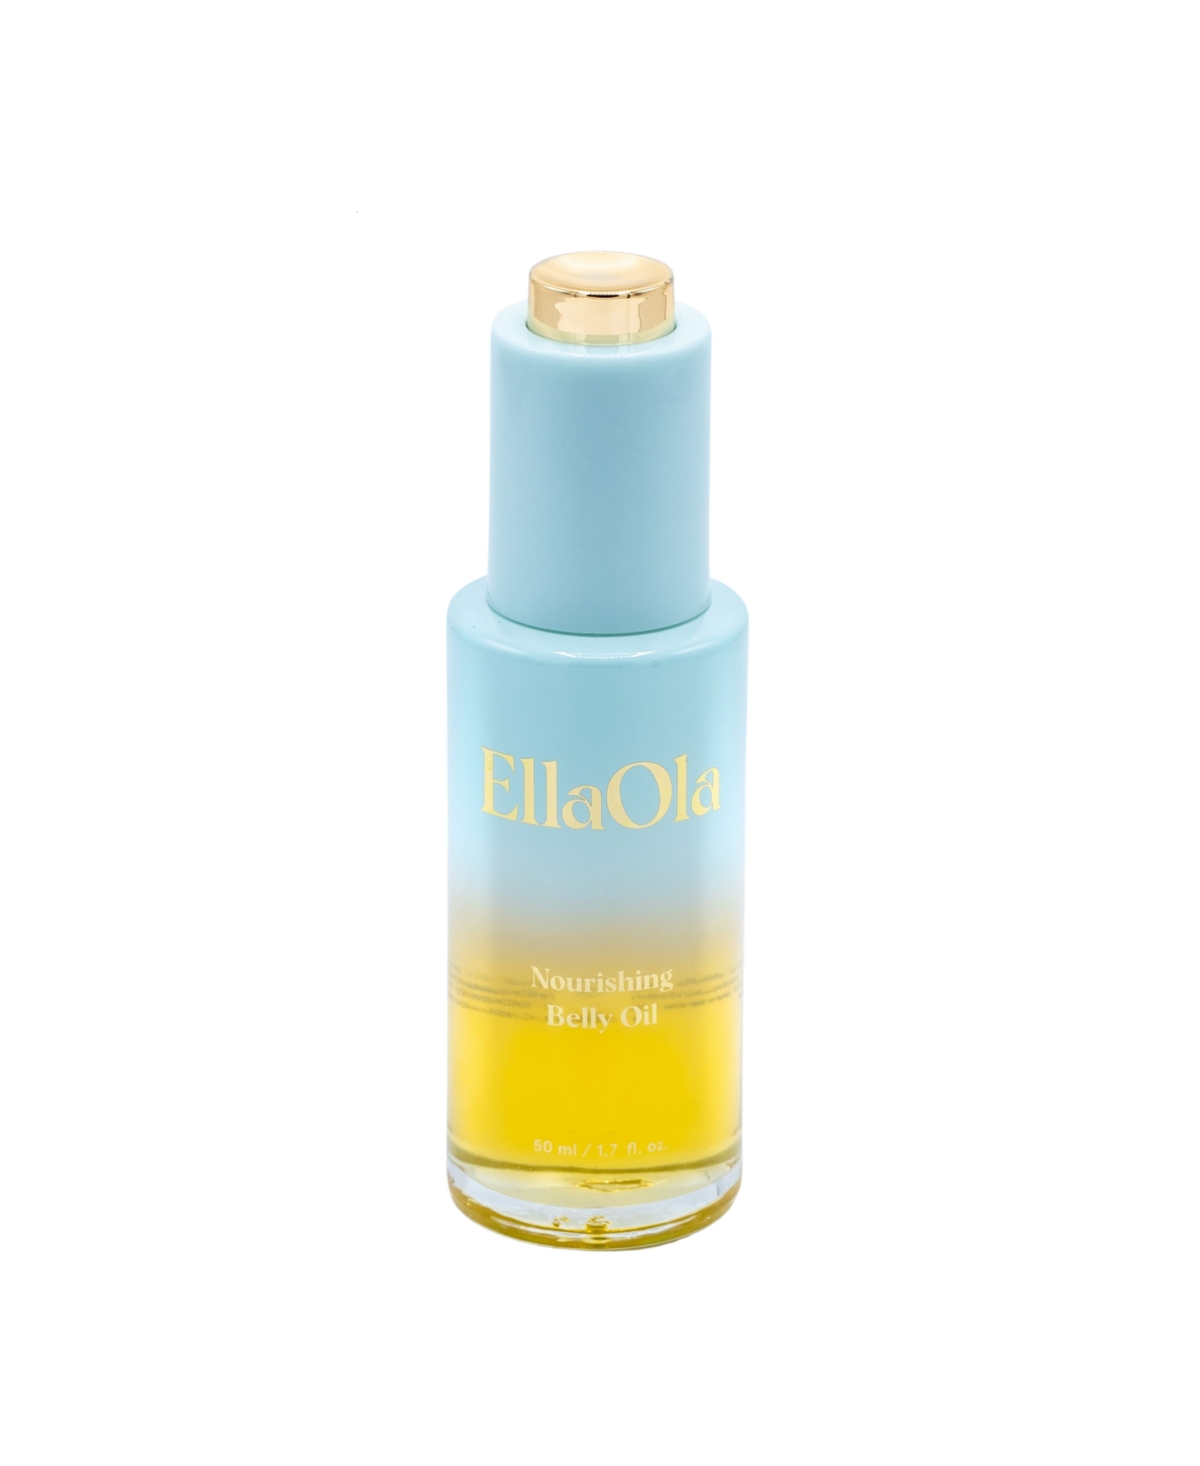 Nourishing Belly Oil for stretch marks and to smooth, firm and brighten skin - Turquoise